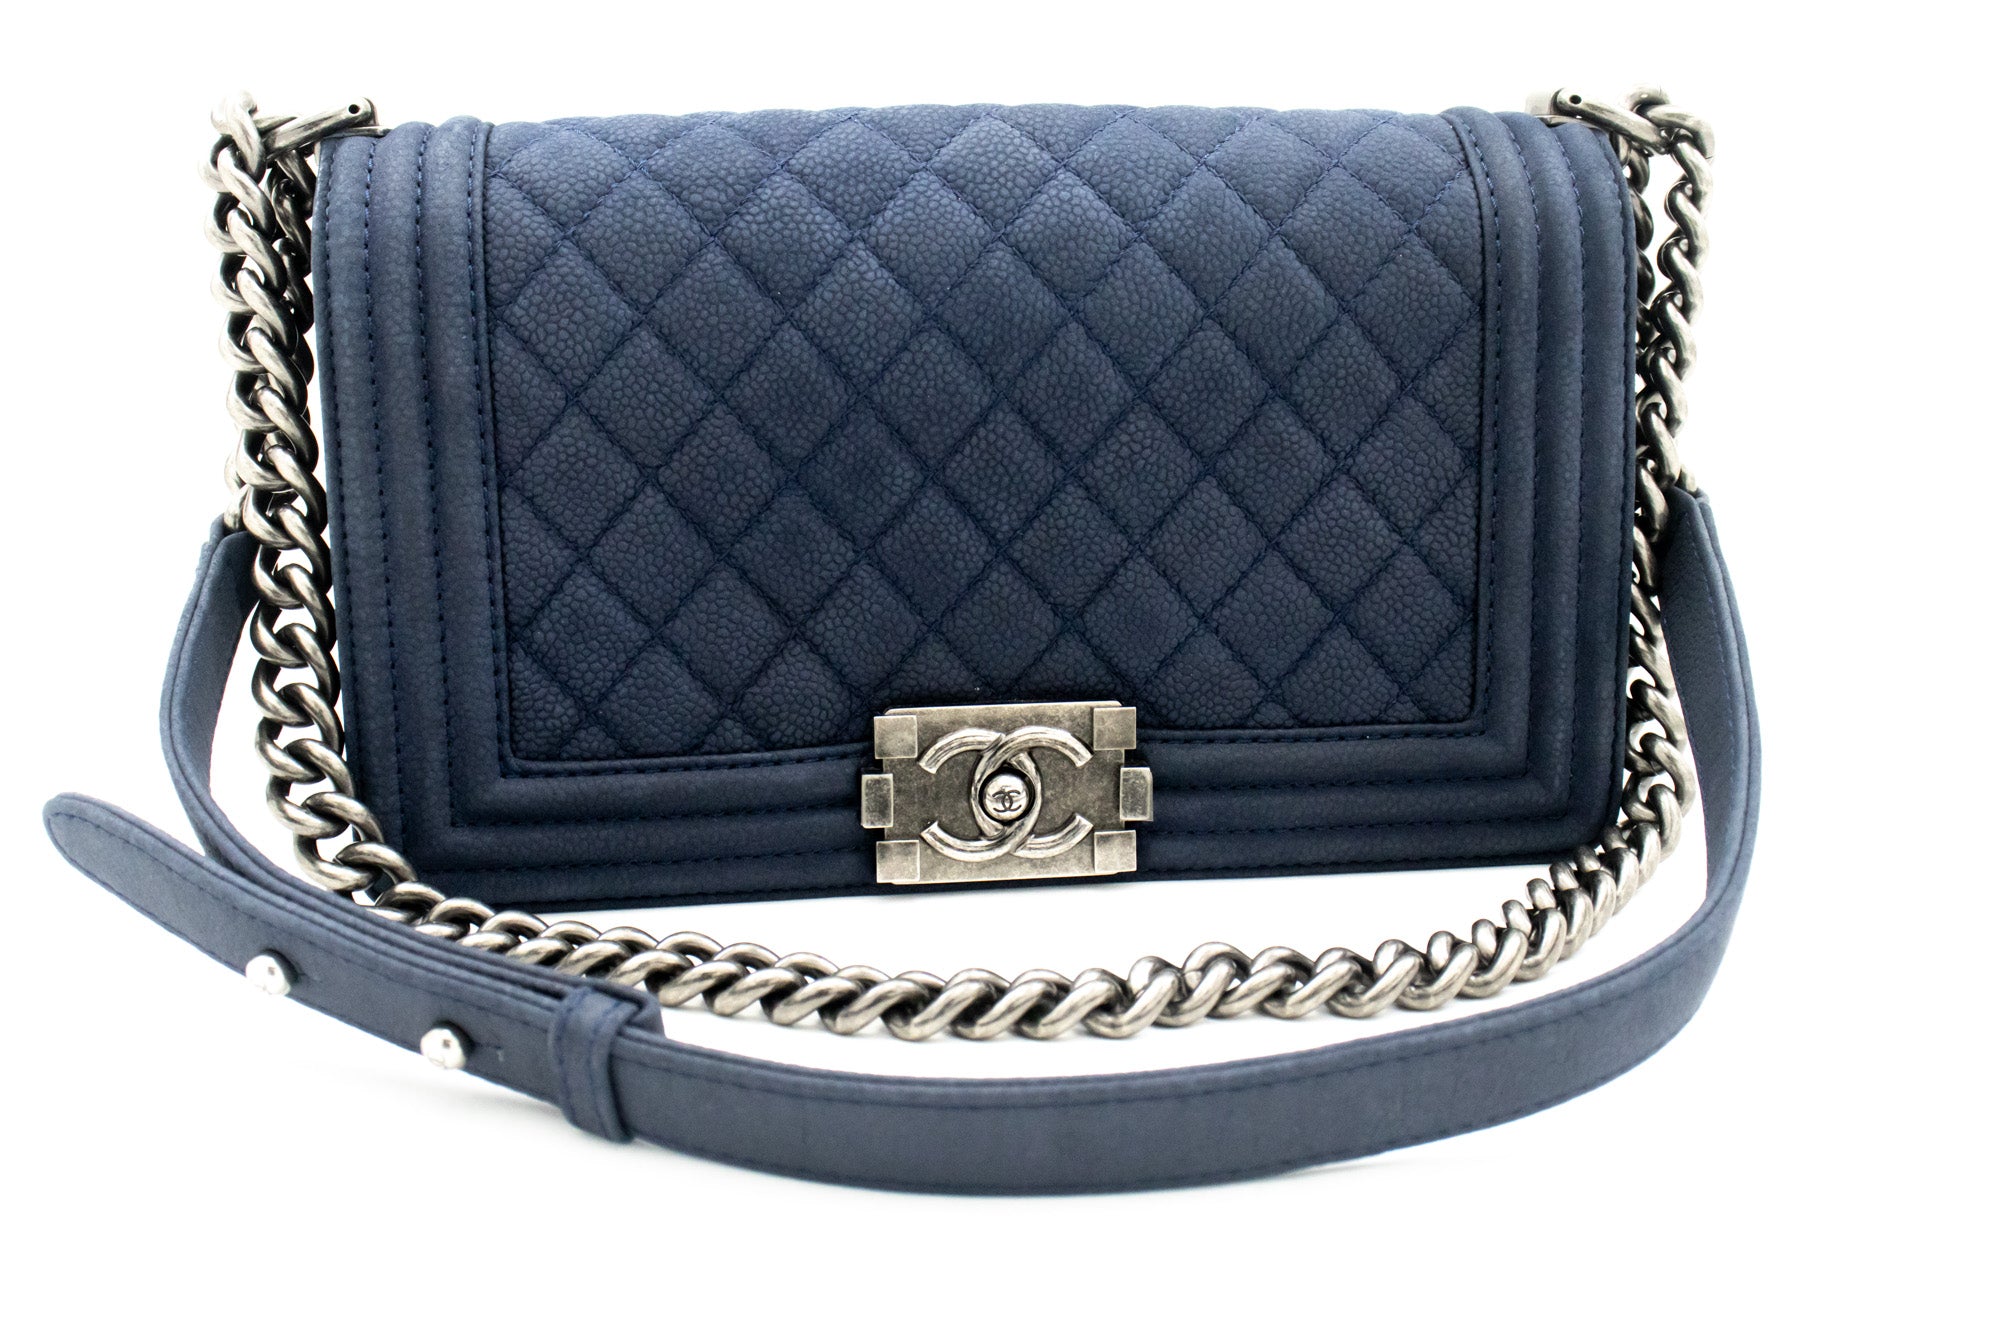 Authentic Chanel Caviar Medallion Tote Deep Navy